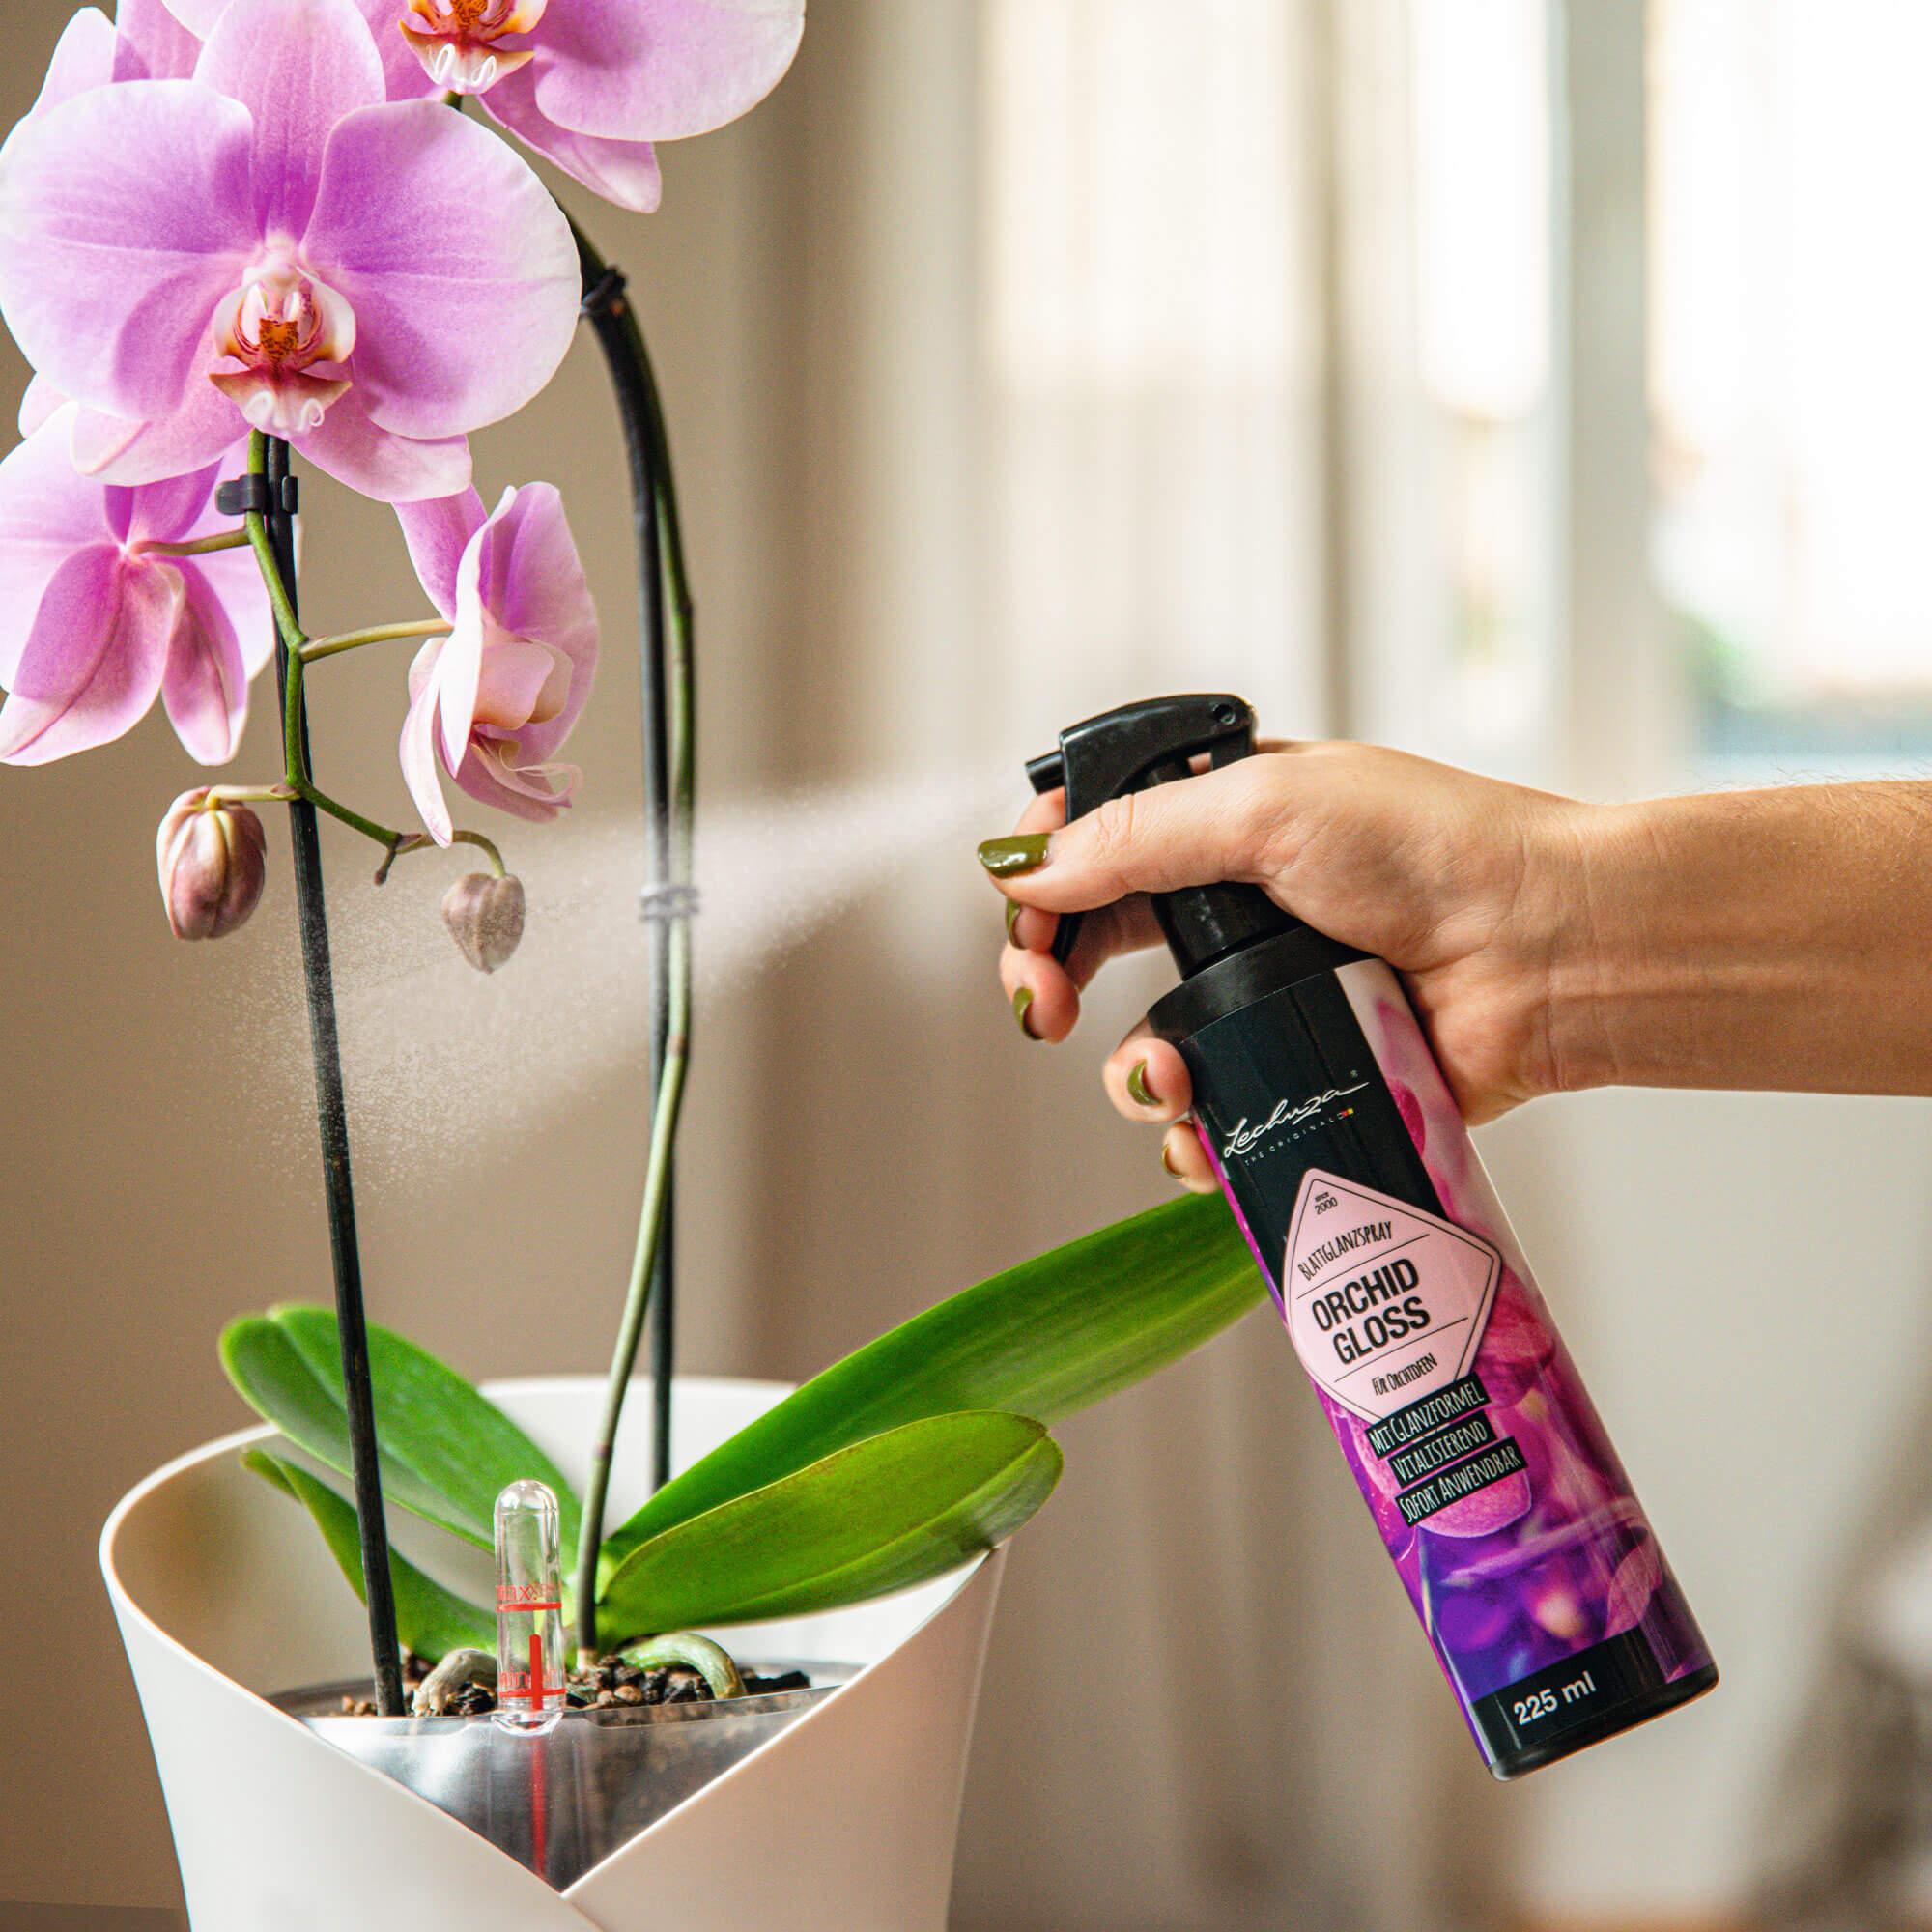 Orchid Gloss - leaf gloss spray for orchids